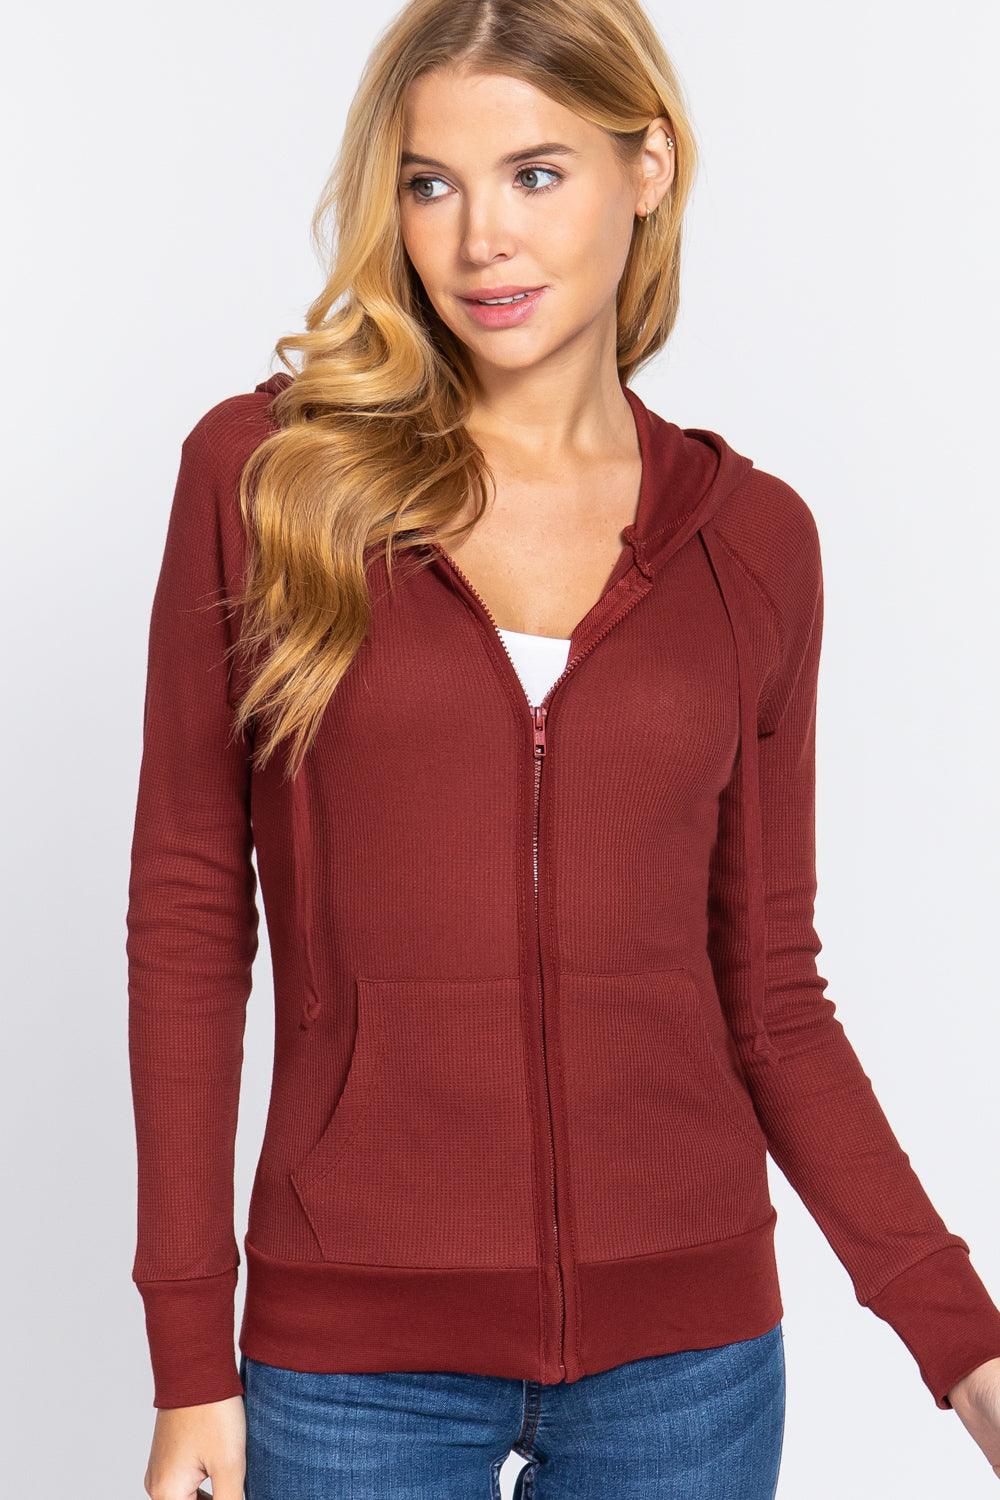 Buying Guide: Stylish and Healthy Dresses 2023 | Fashionably Fit | Thermal Hoodie Jacket